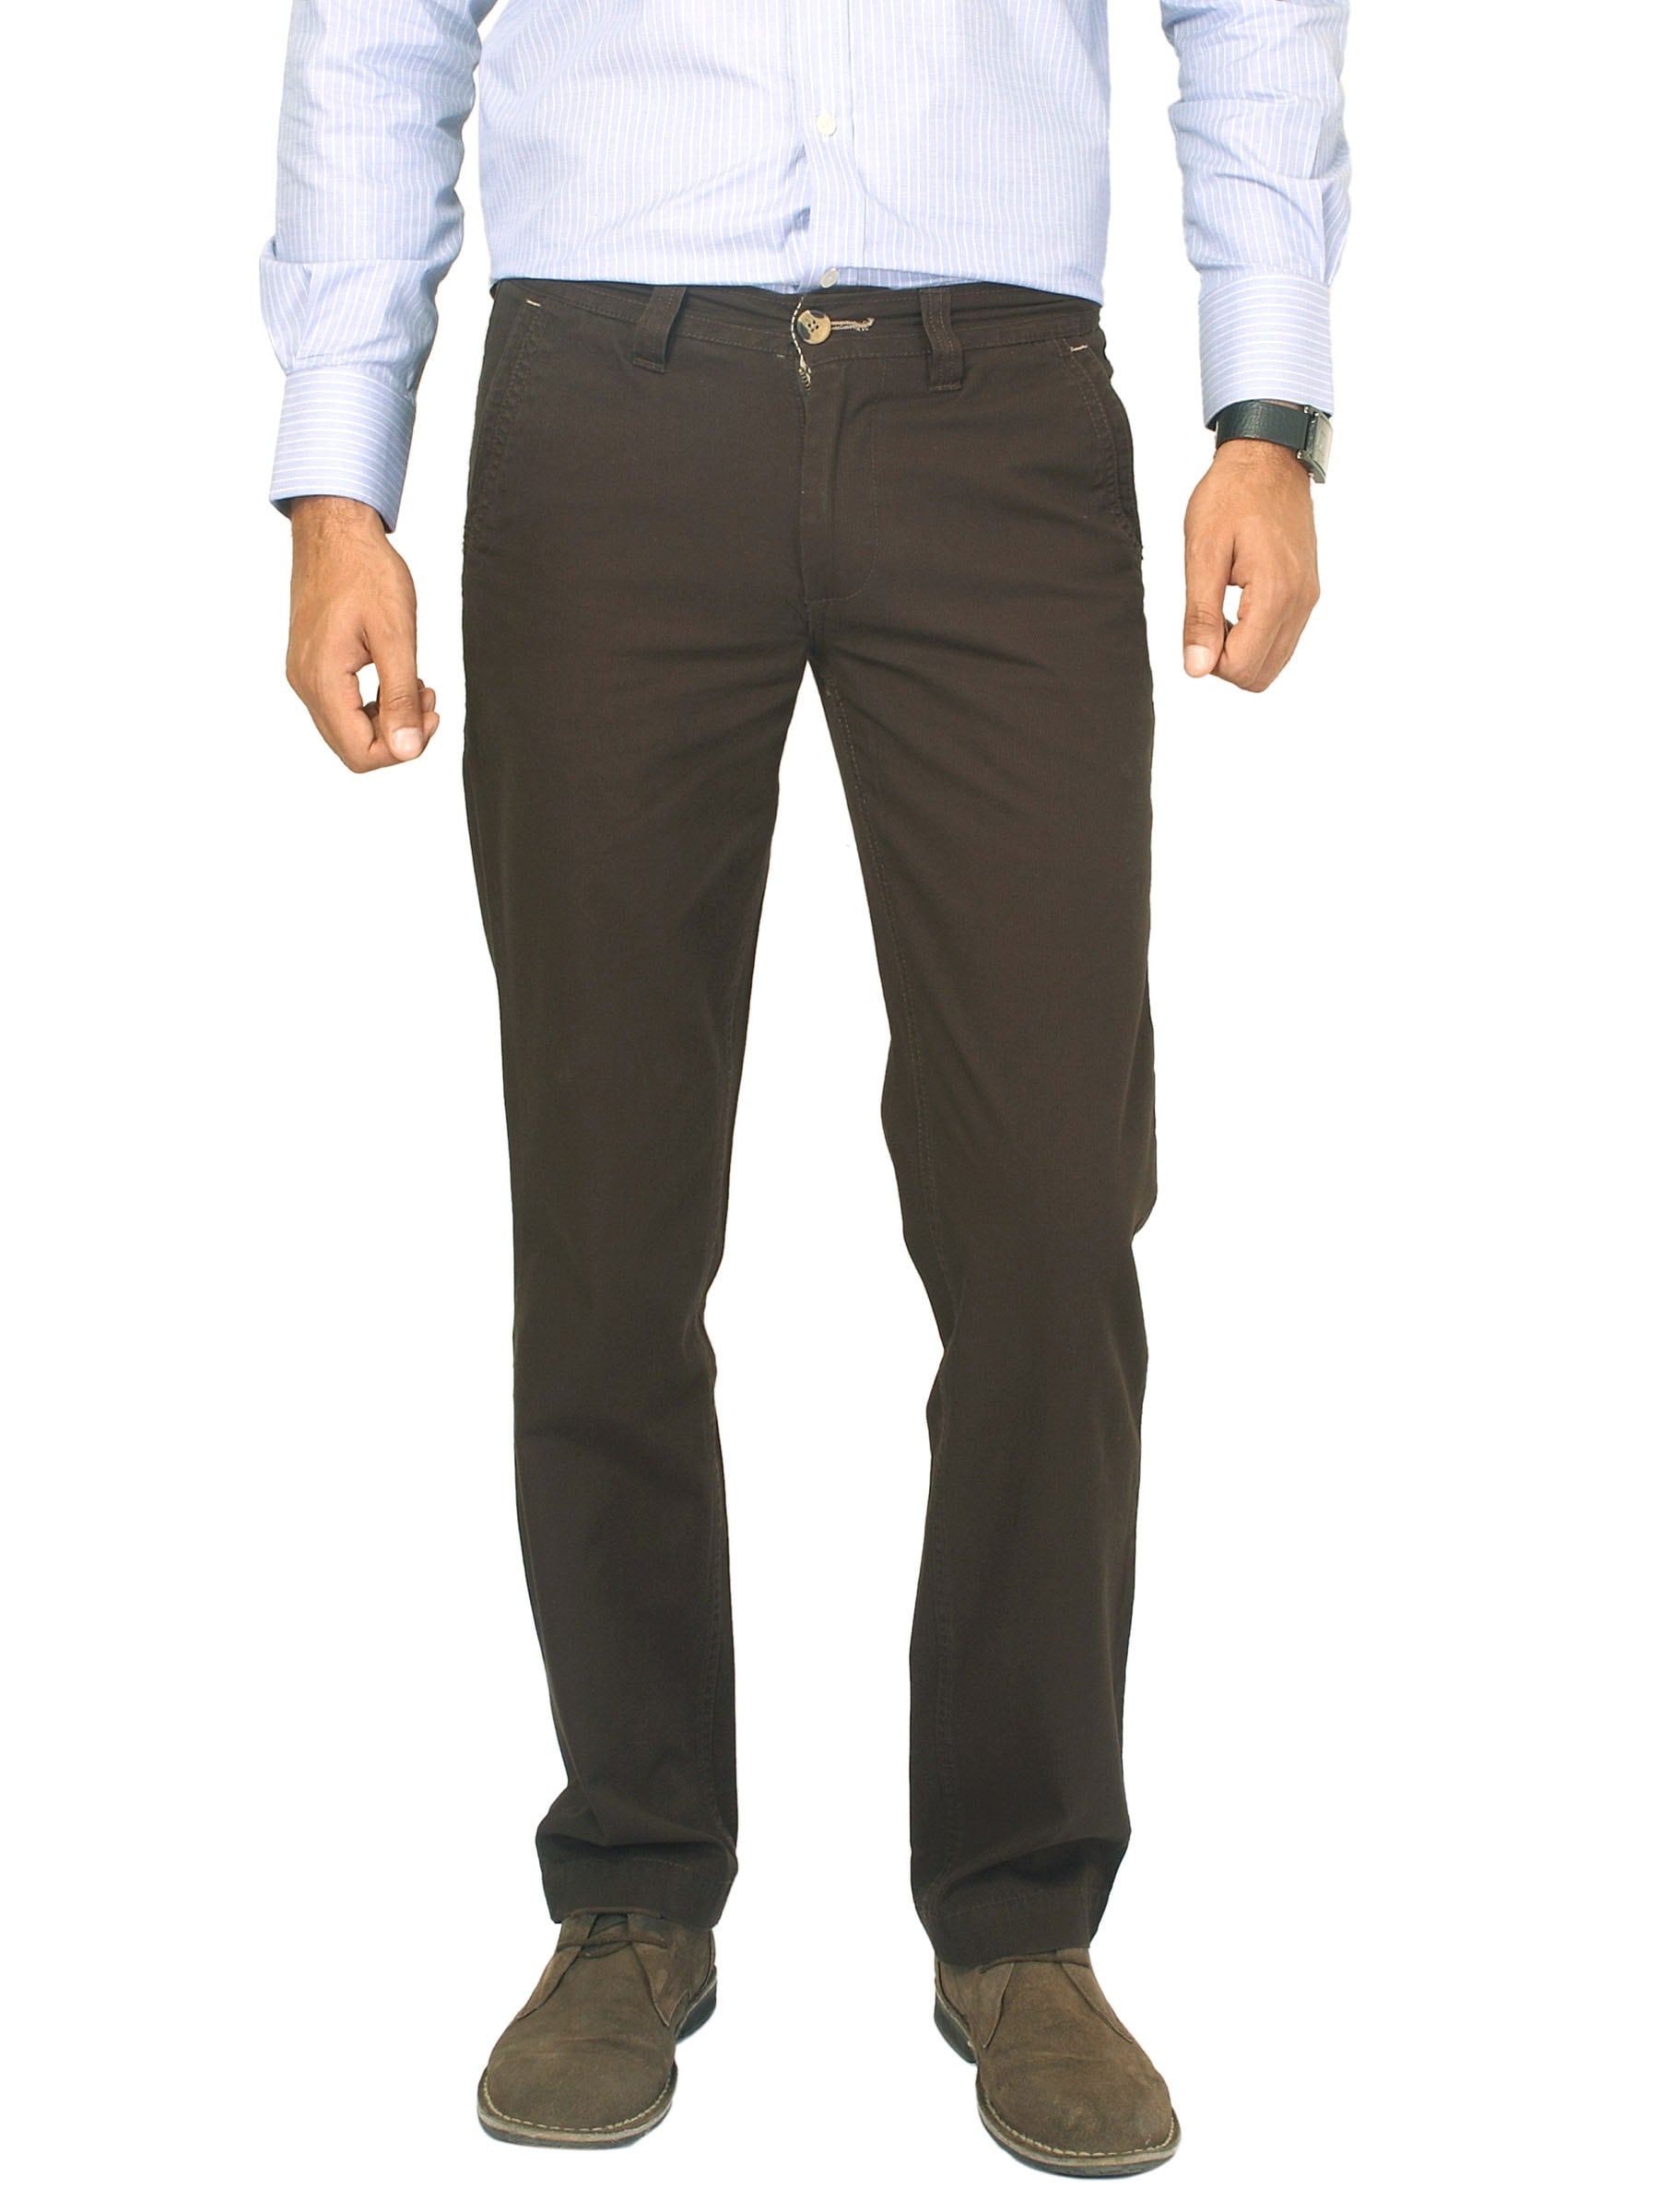 Basics Men Solid Brown Trousers